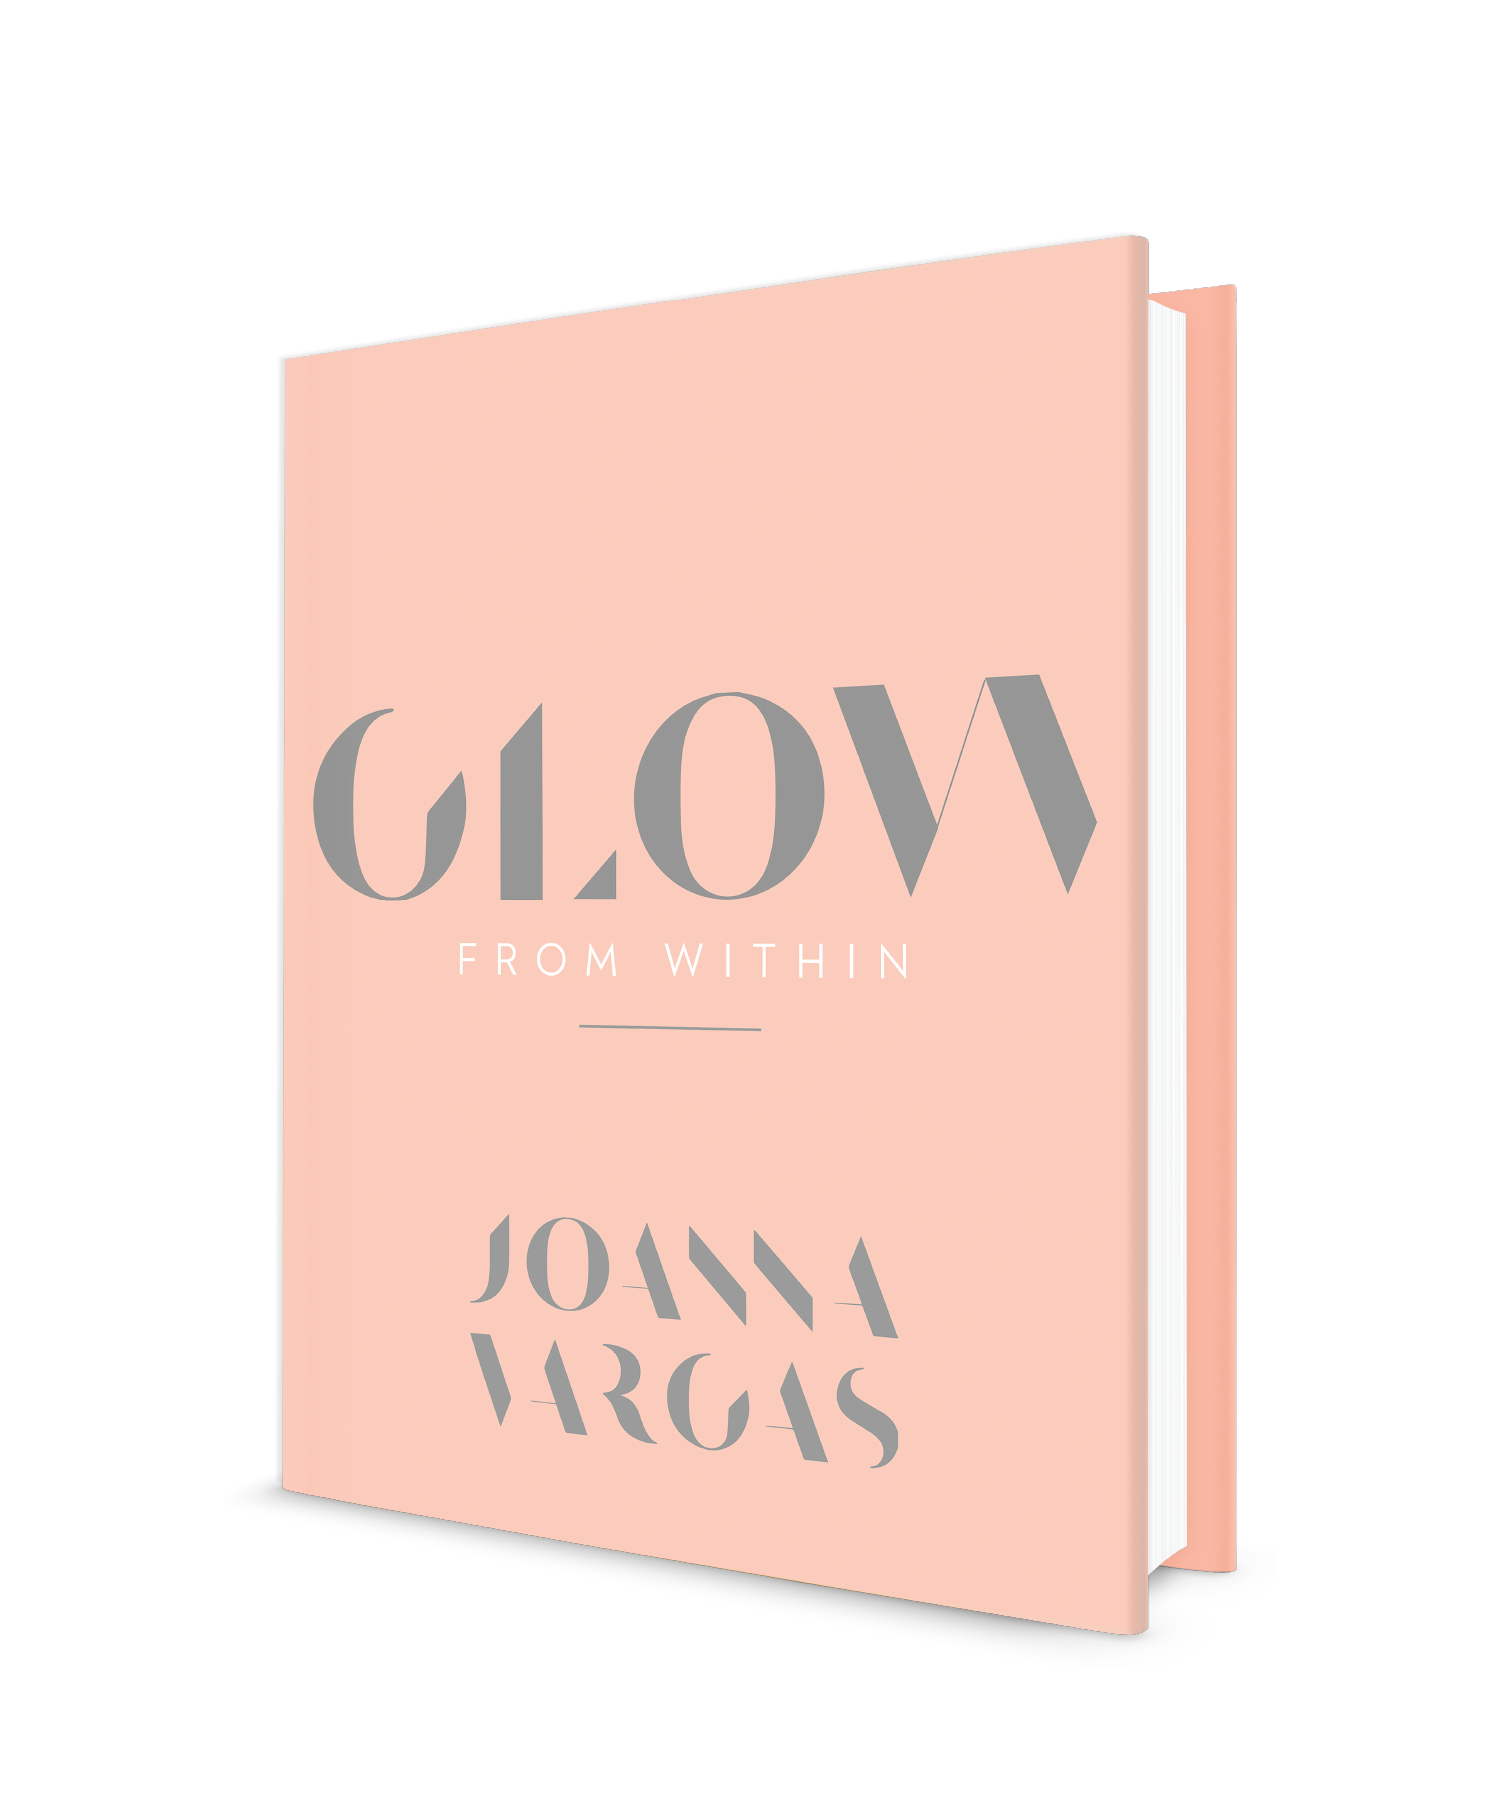 GLOW FROM WITHIN